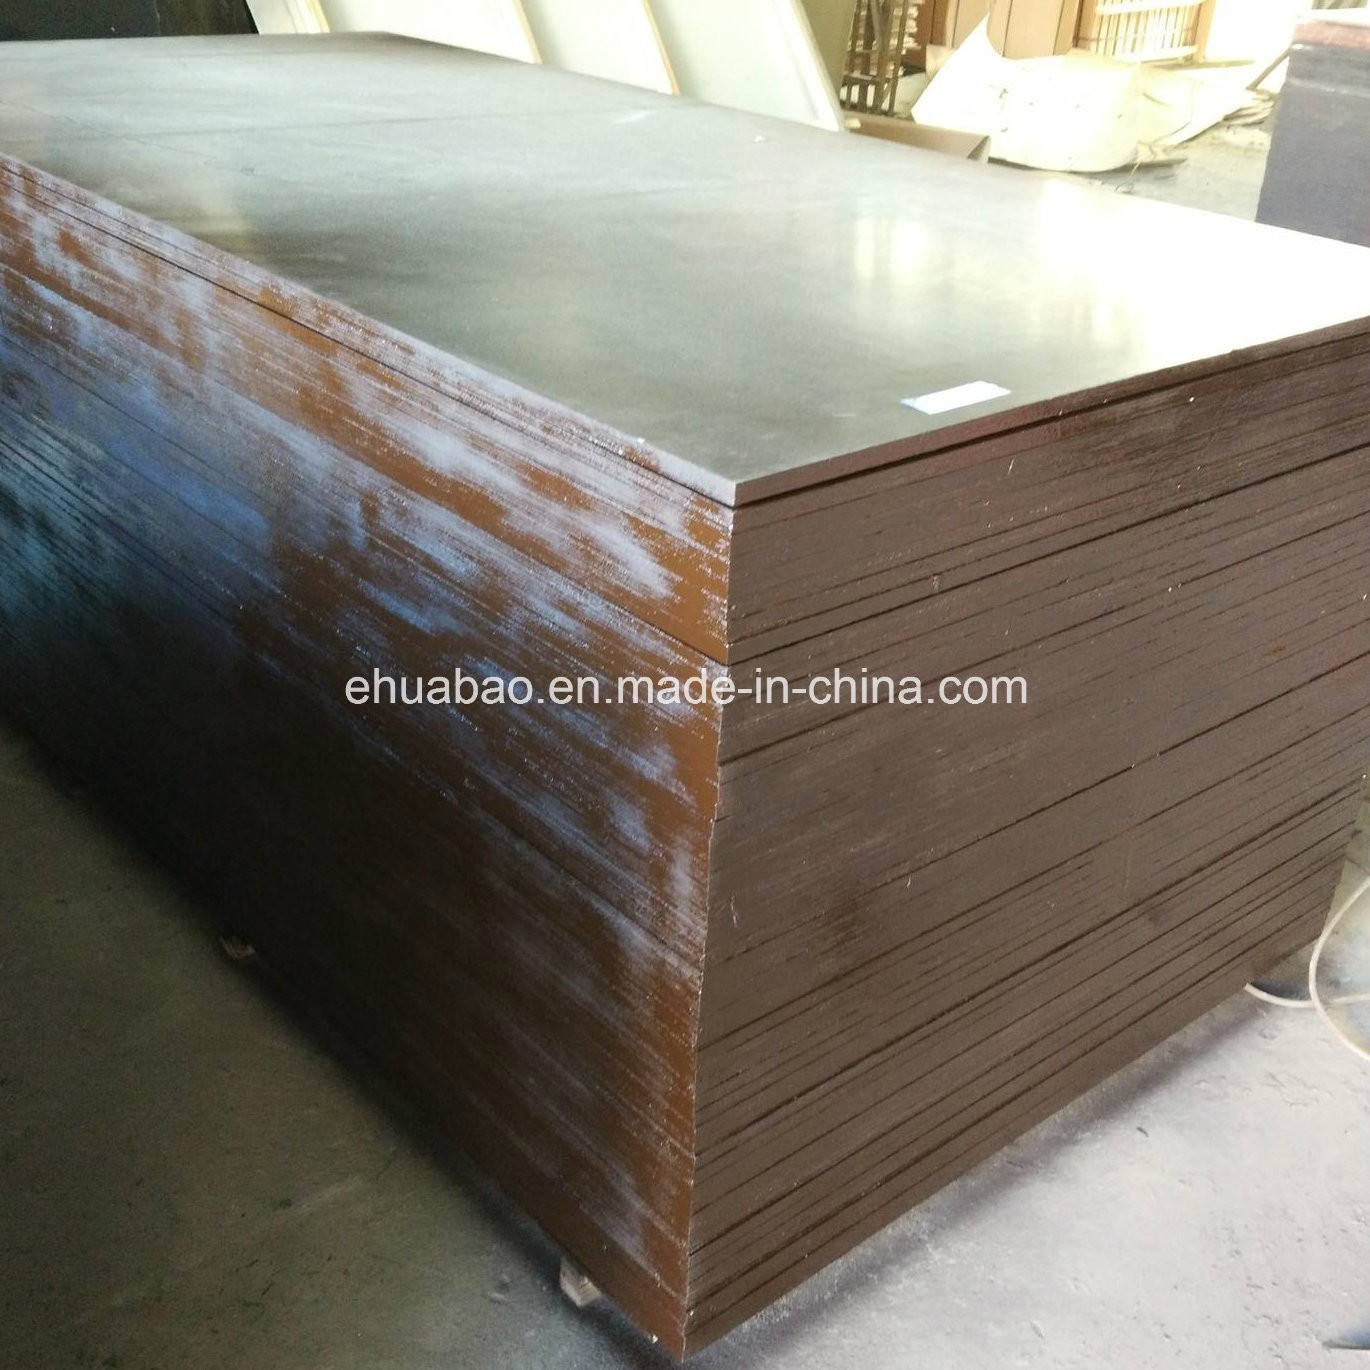 Best Quality Plywood for Dubai Market From Huabao